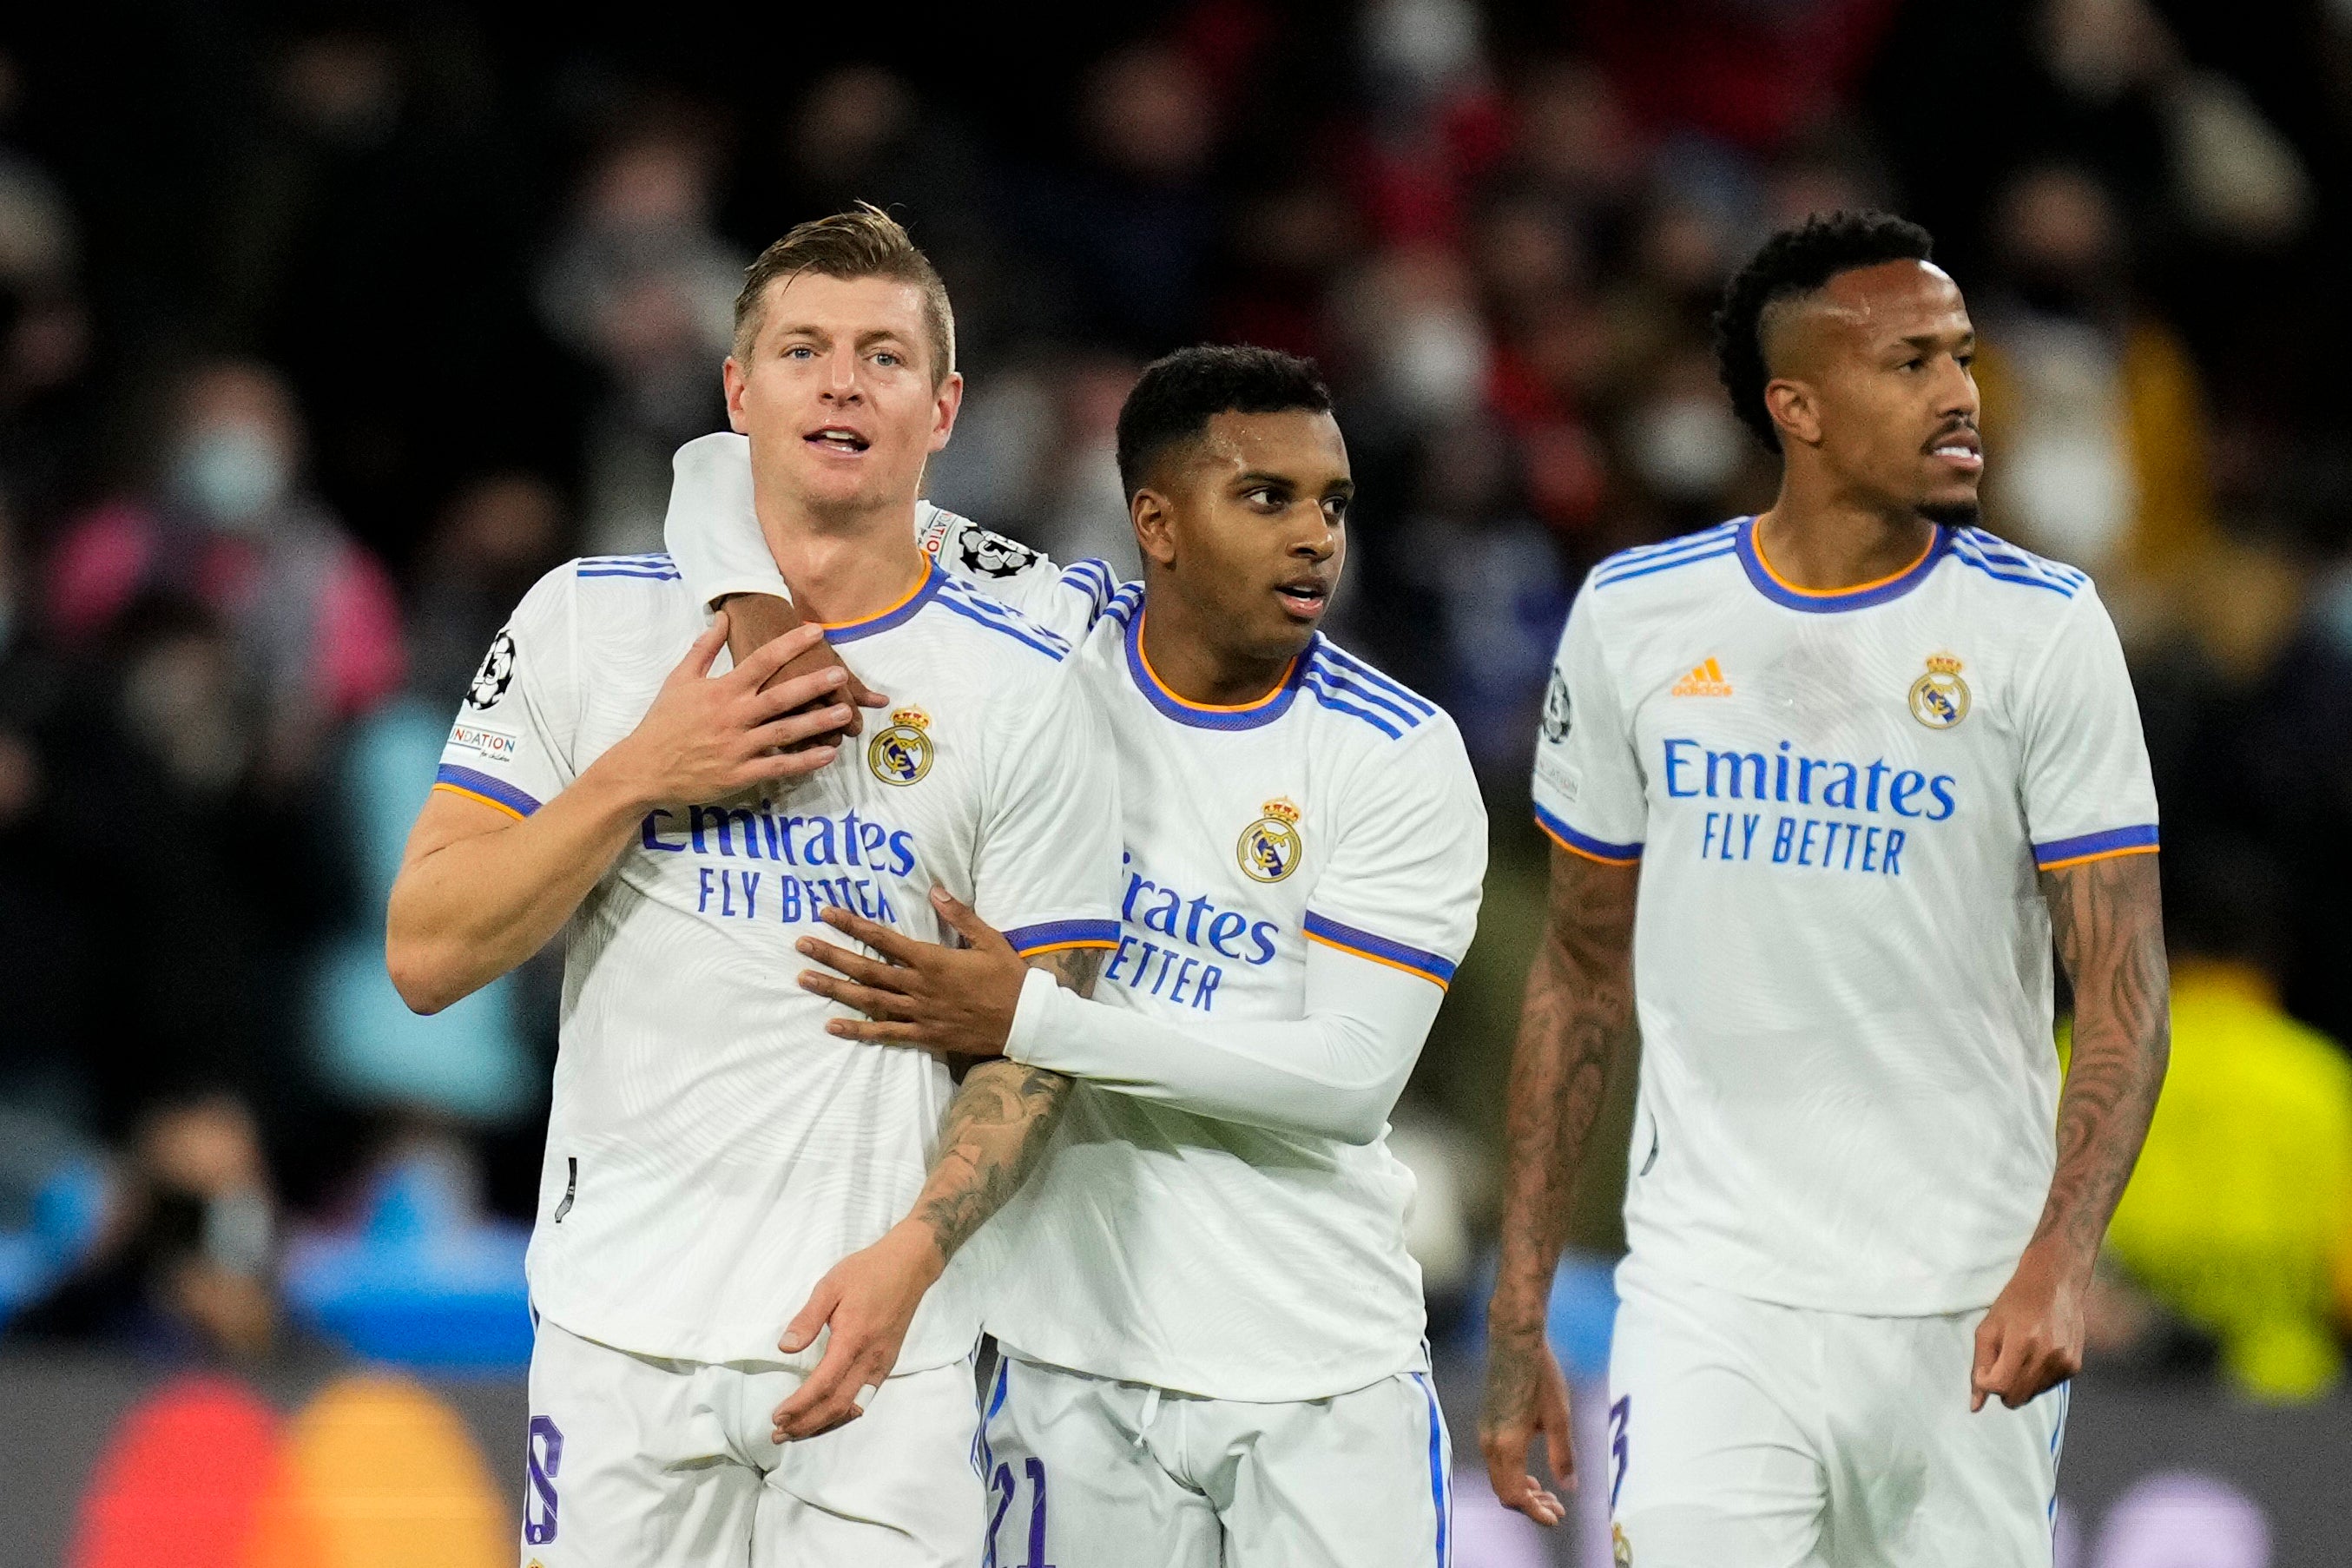 Toni Kroos (left) celebrates with his Real Madrid team mates after opening the scoring in a decisive match in Group D (Bernat Armangue/AP/Press Association Images)